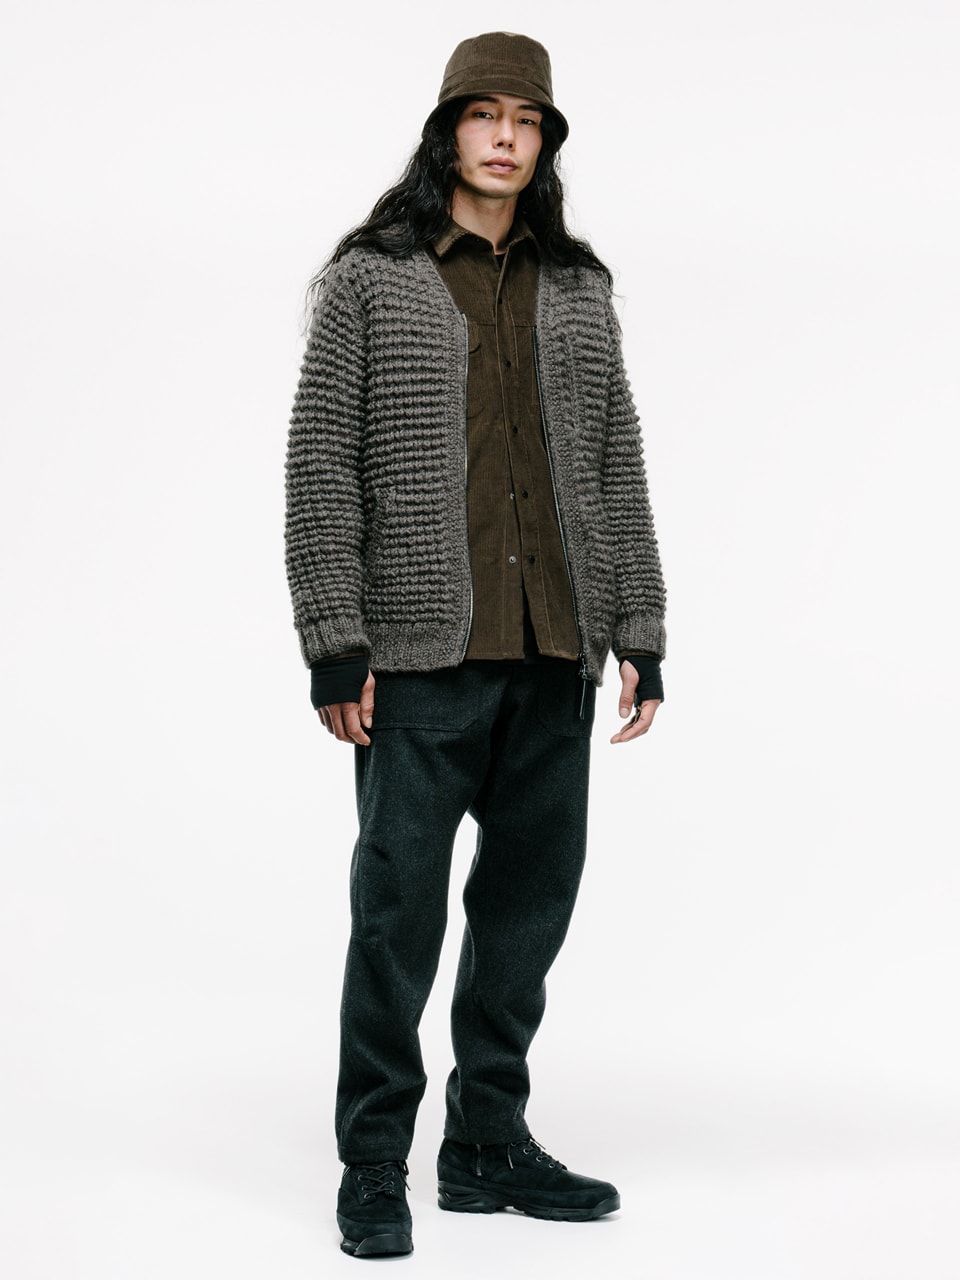 HAVEN Offers Sleek Technical Pieces for Fall/Winter 2022 Fashion